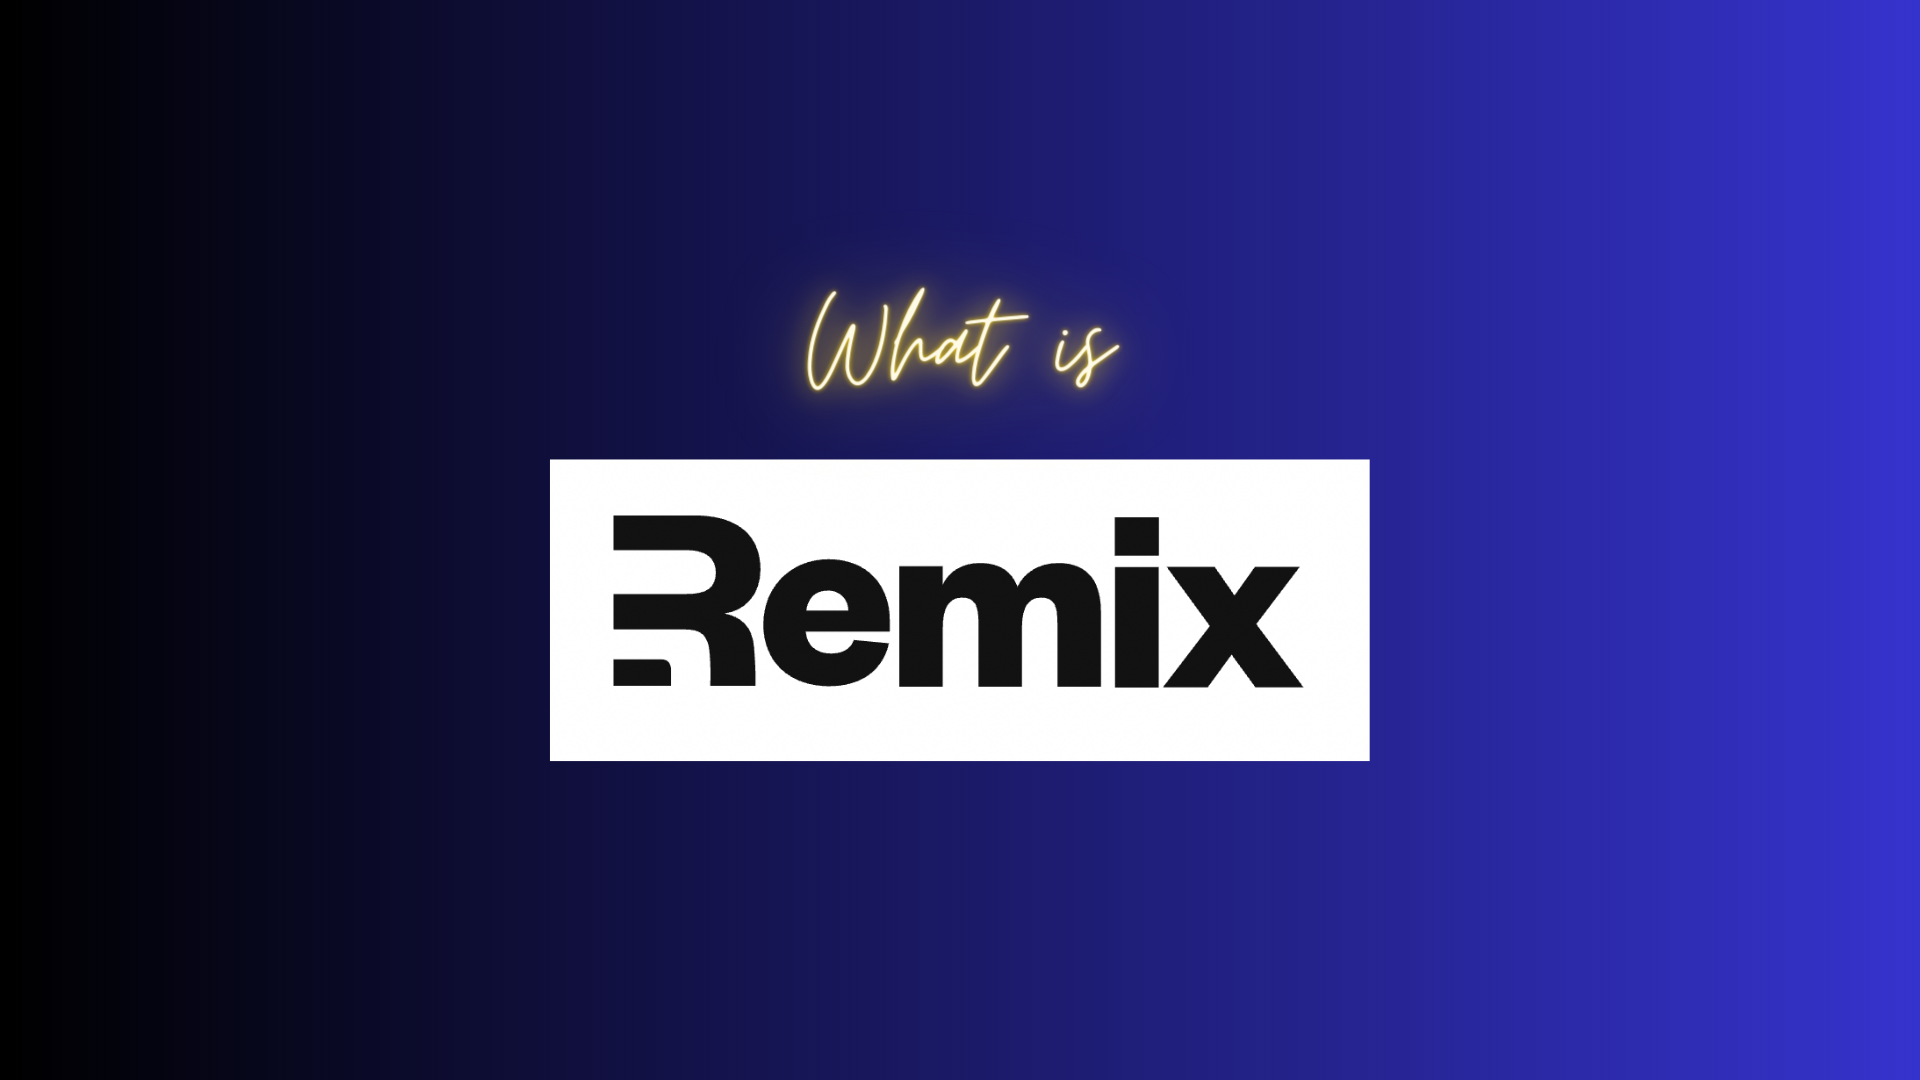 What is Remix text and logo on a dark blue background